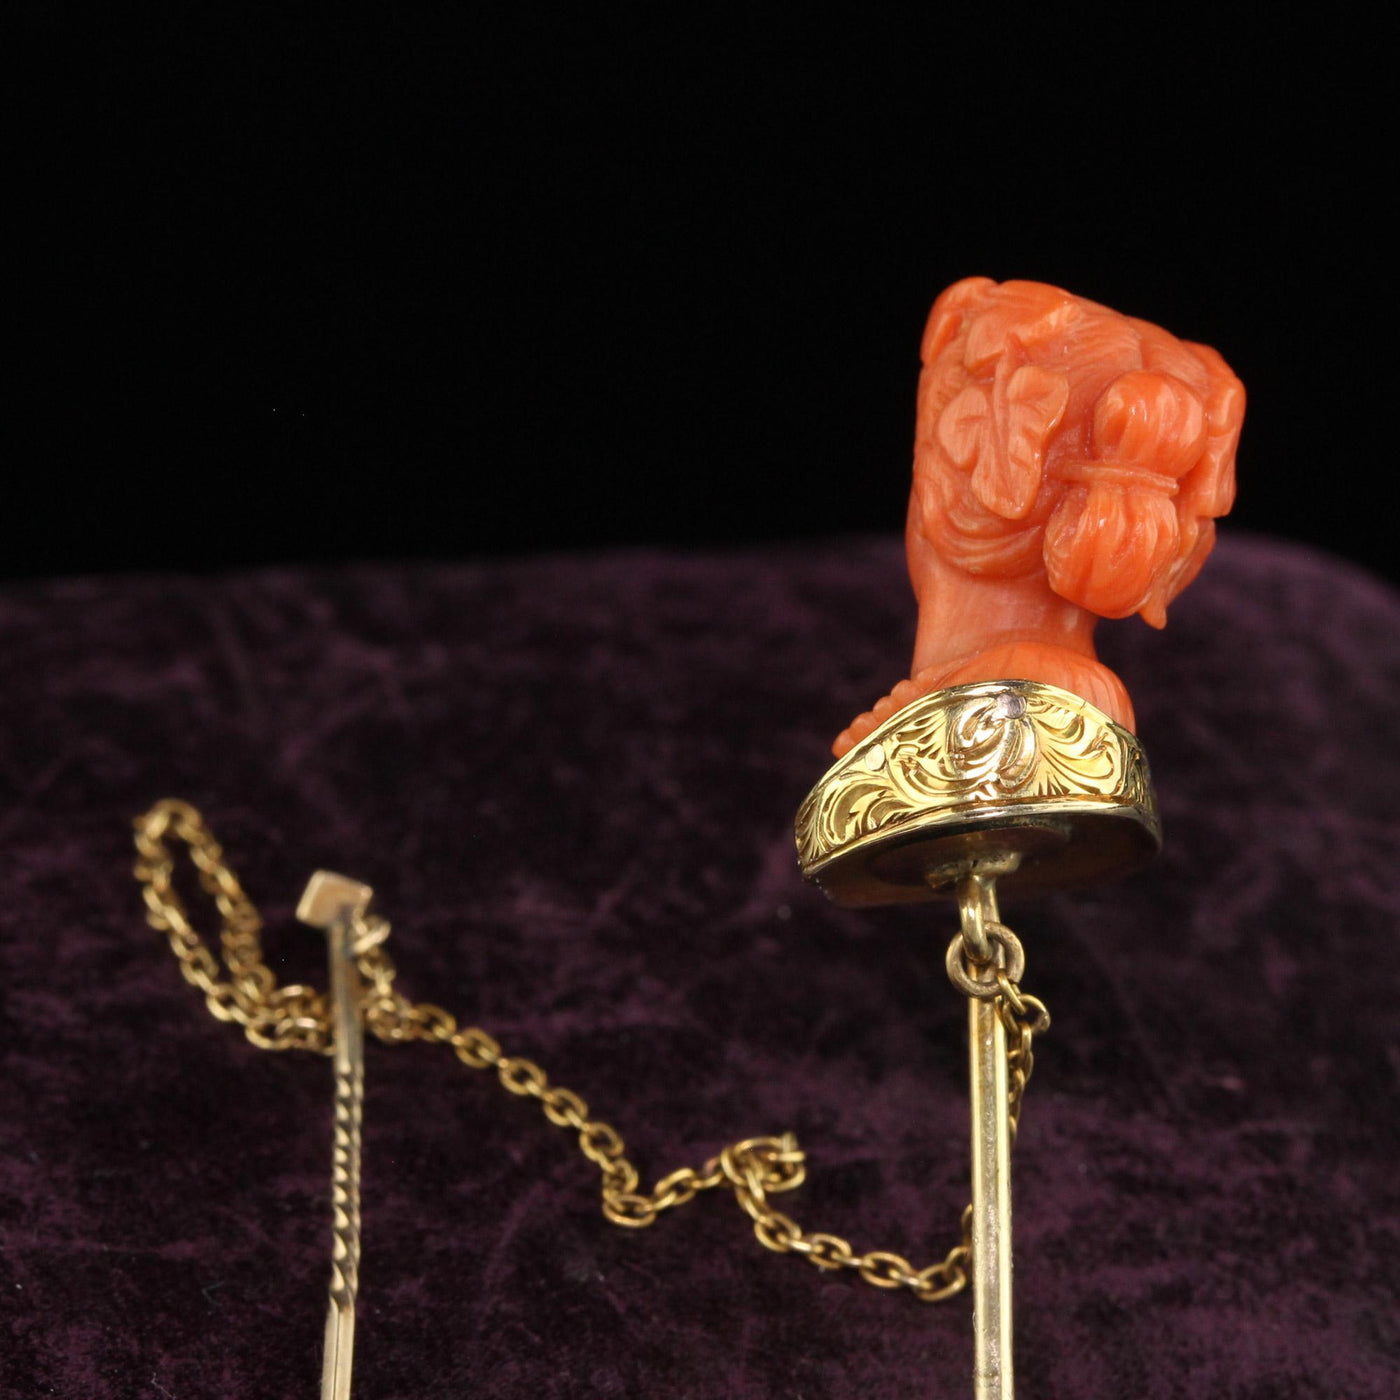 Antique Victorian 14K Yellow Gold Carved Coral Lady Stick Pin